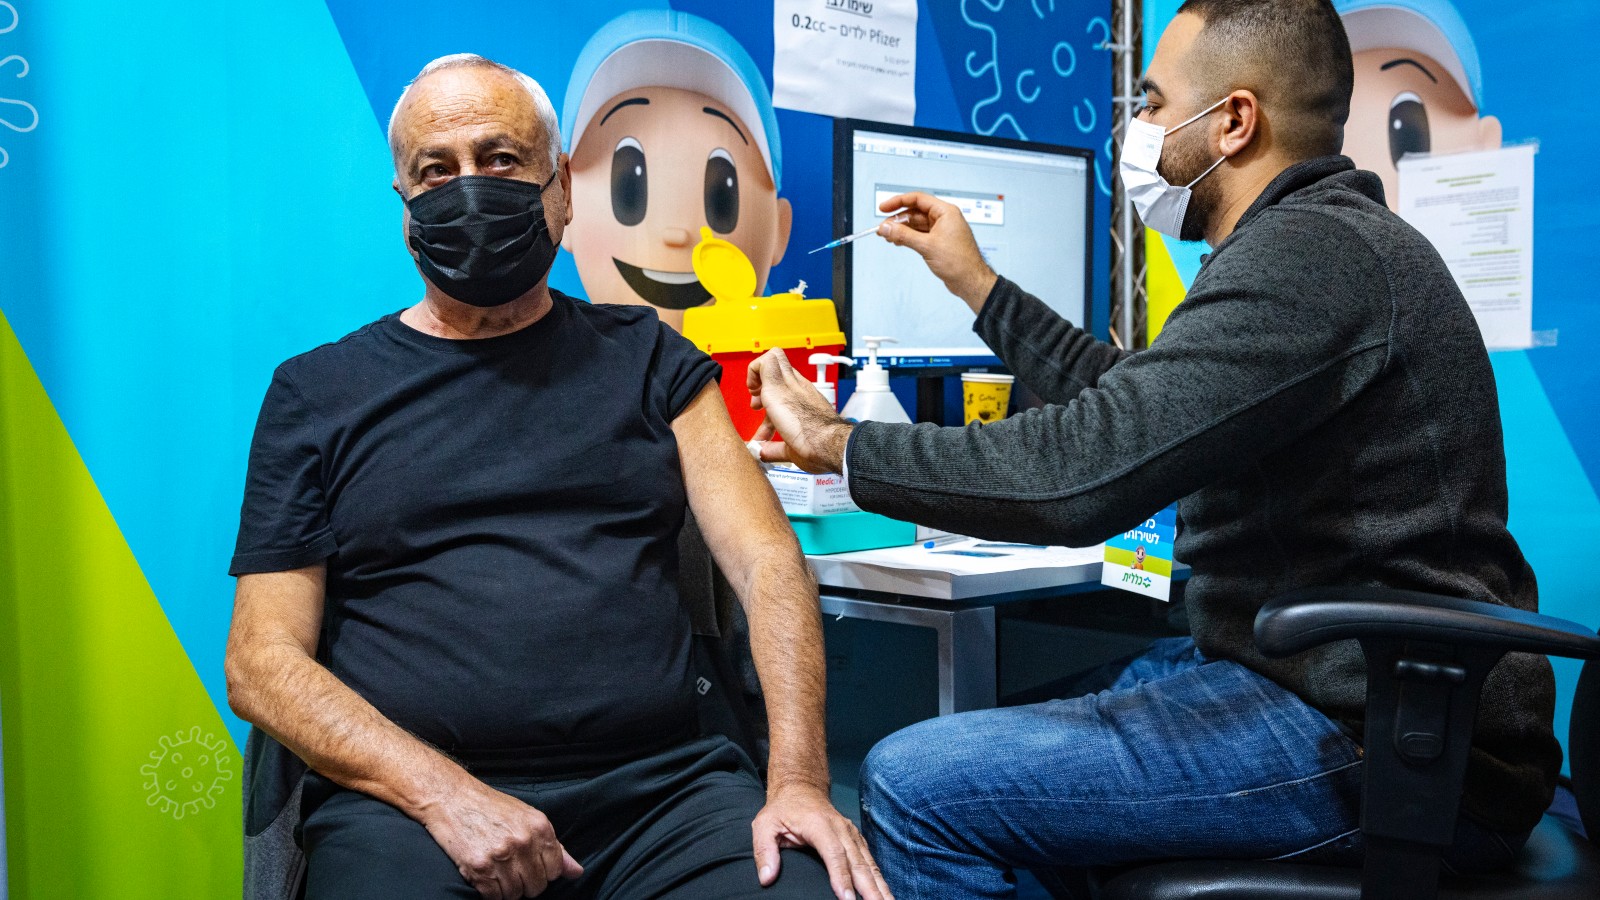 Israeli adults over the age of 60 began receiving a fourth dose of the Pfizer Covid-19 vaccine on January 3, 2022. Photo by Olivier Fitoussi/Flash90